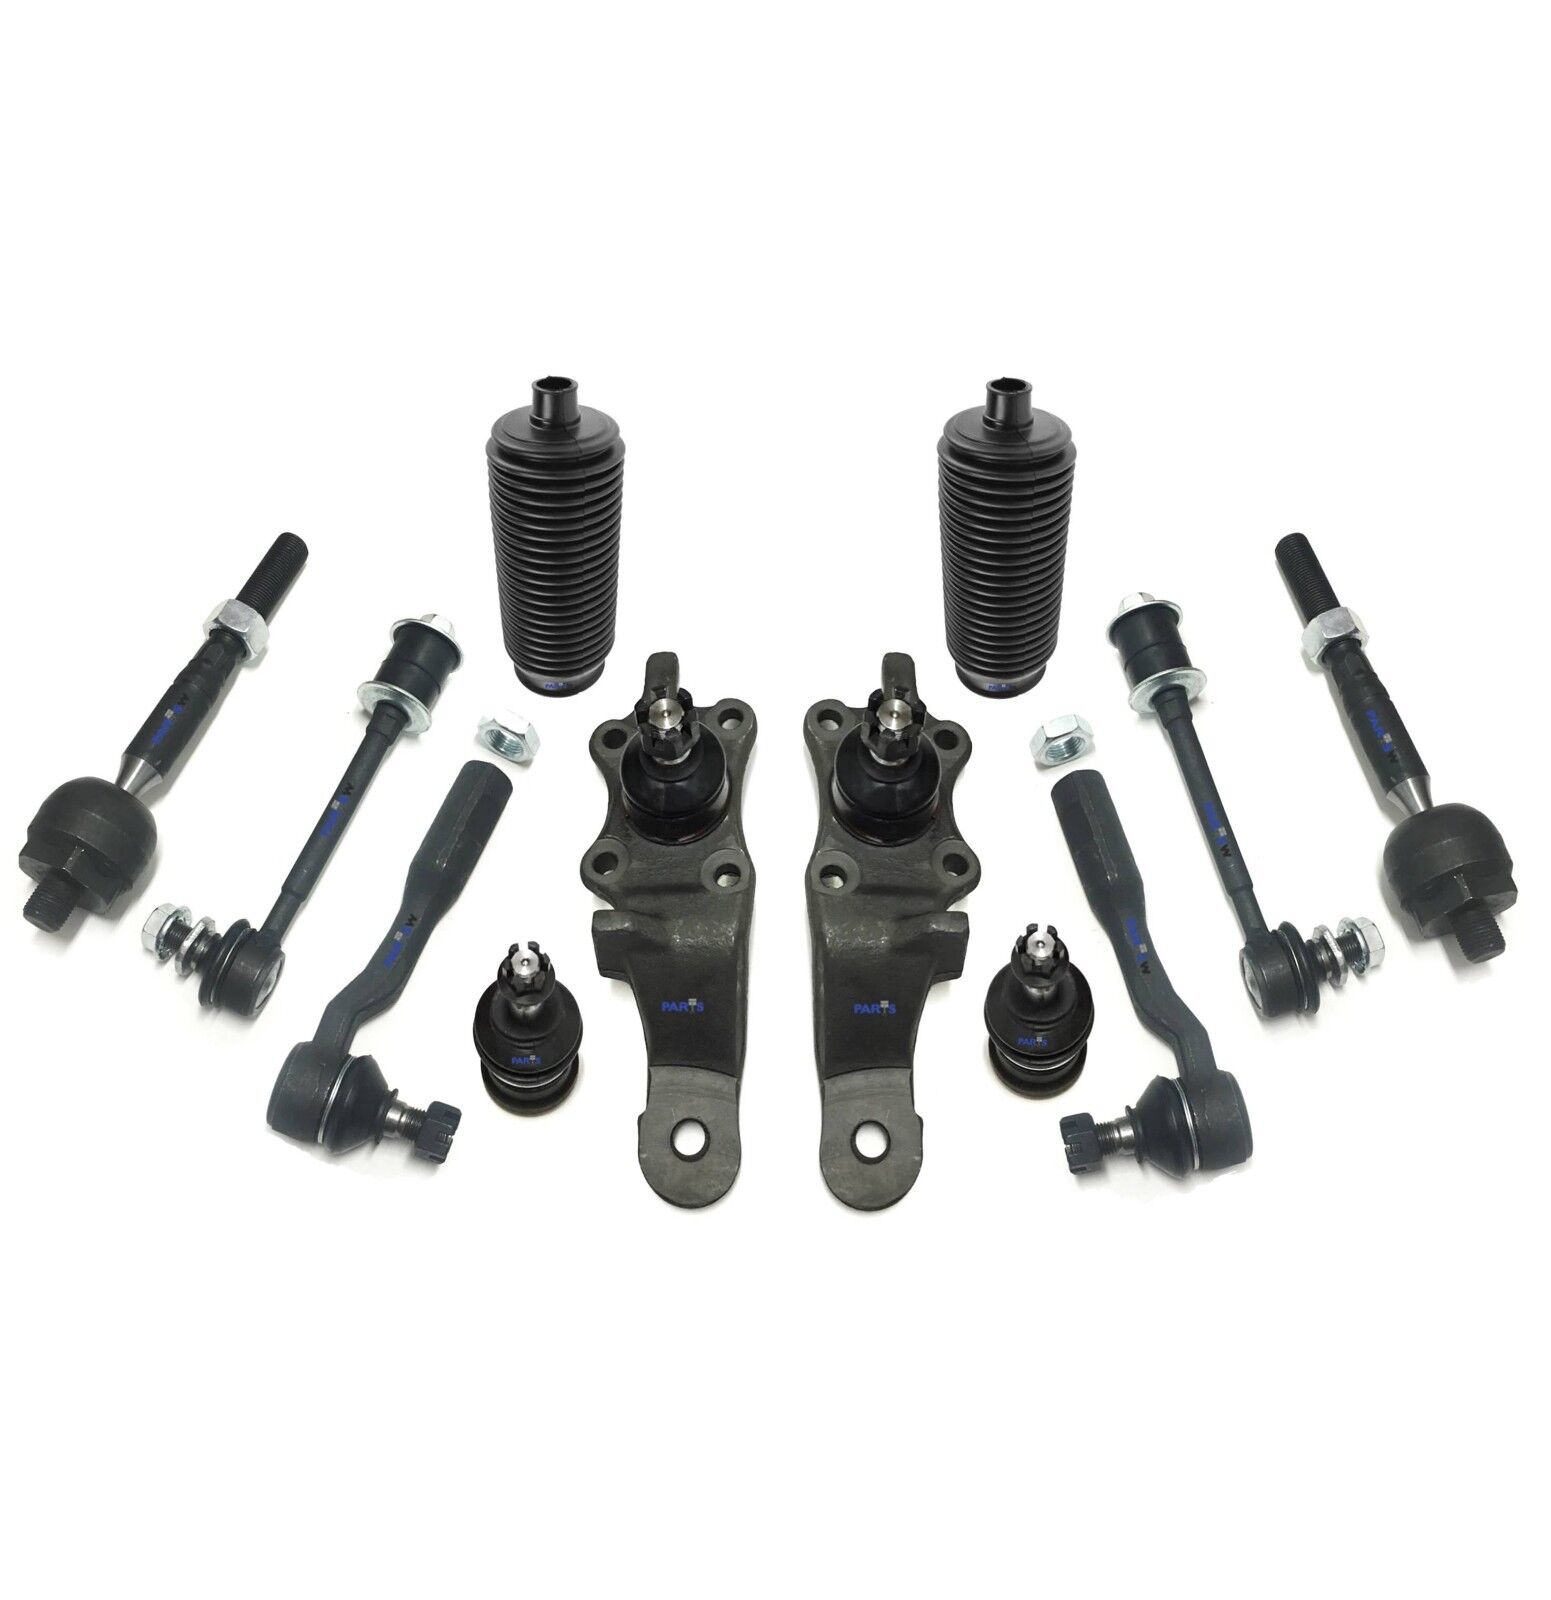 12 New Pc Suspension Kit for Toyota Tundra Inner & Outer Tie Rod Ends Sway Bar